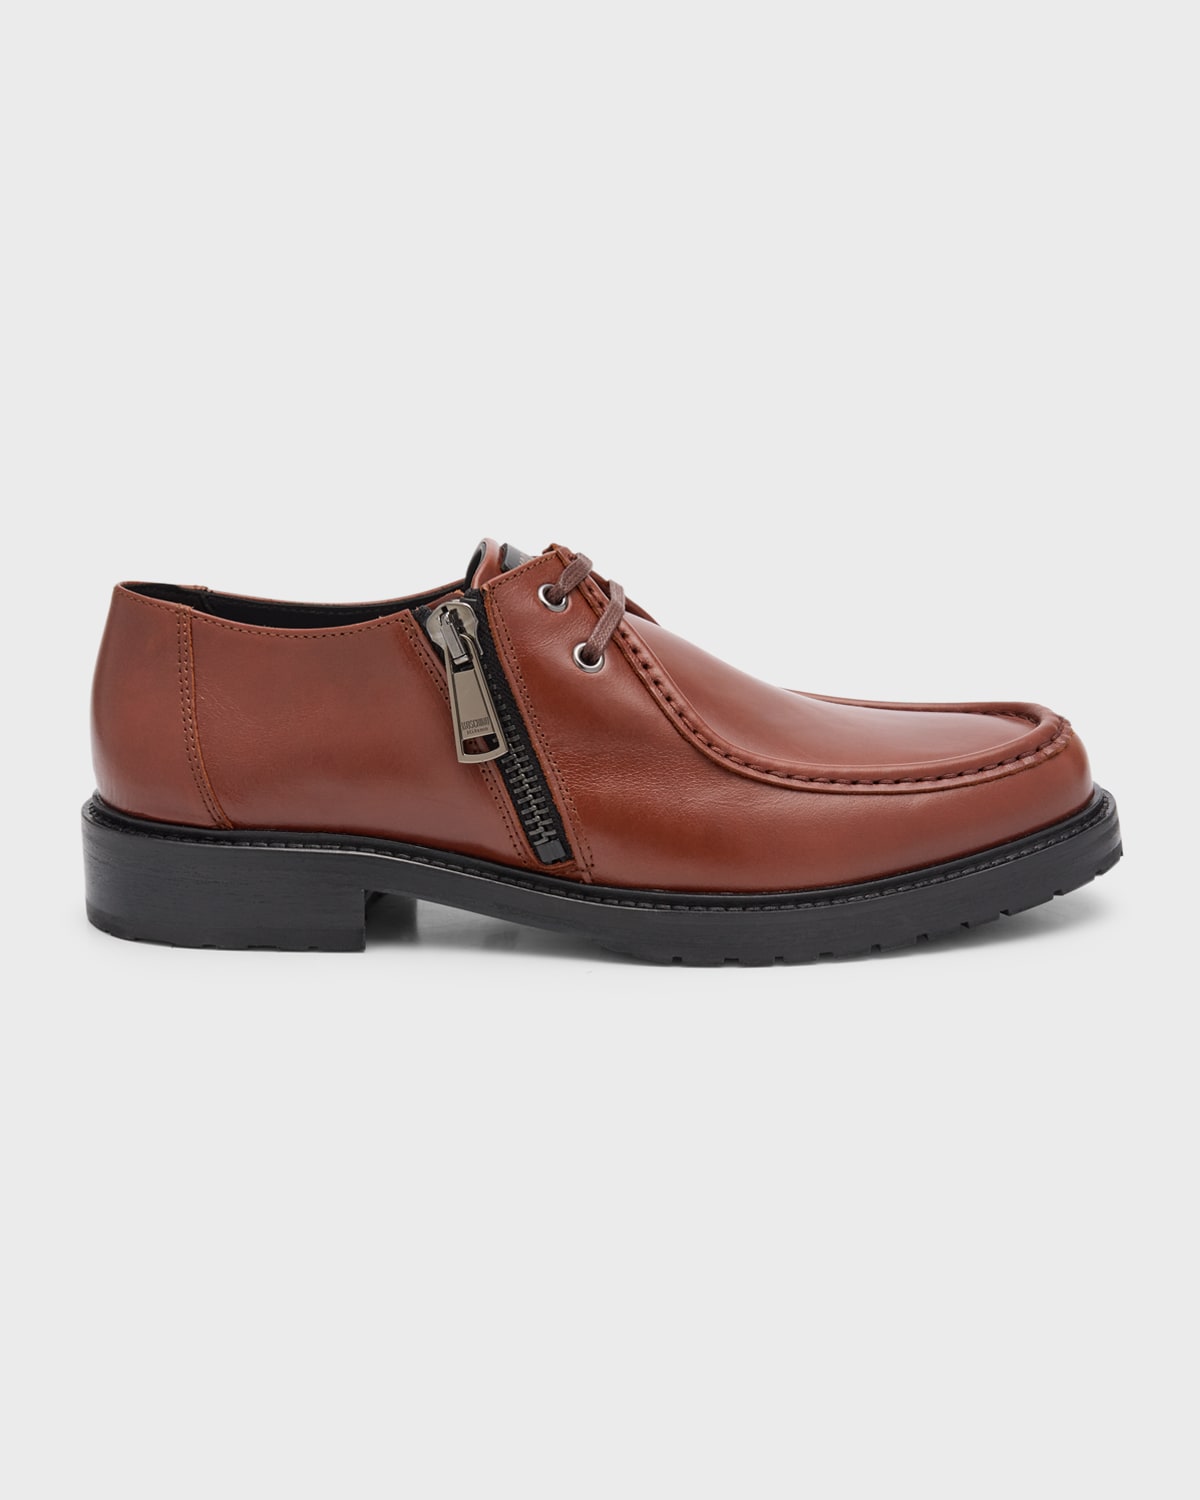 Moschino Men's Leather Casual Moc-toe Loafers In Chestnut